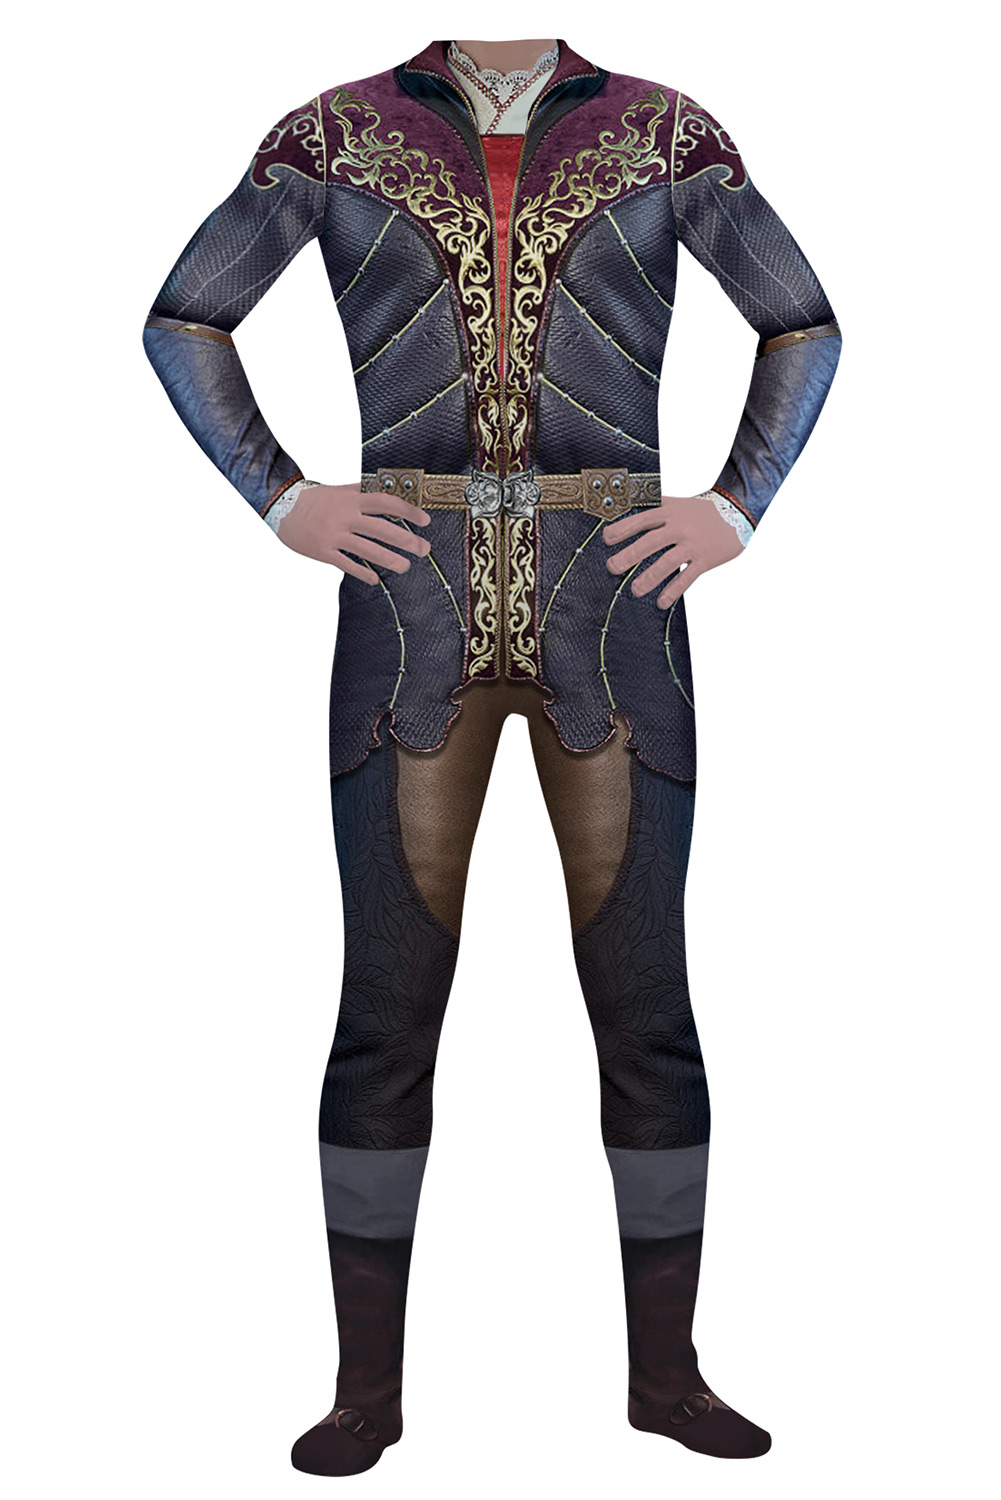 Game Baldur's Gate Astarion Jumpsuit Outfits Halloween Carnival Suit Cosplay Costume